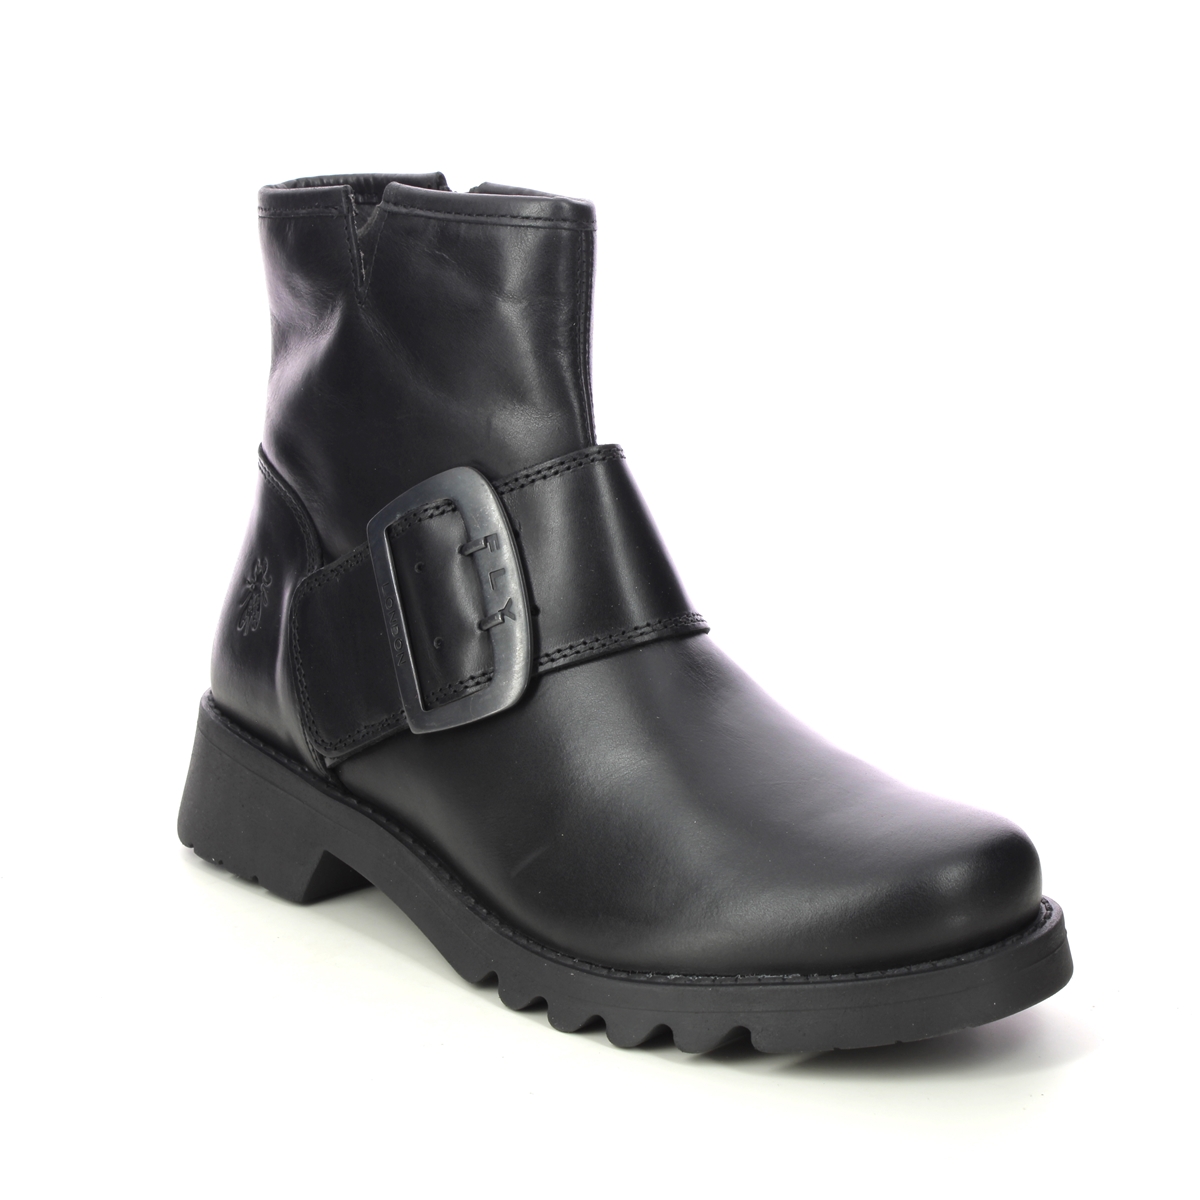 Fly London Rily   Ronin Black Leather Womens Ankle Boots P144991 In Size 37 In Plain Black Leather